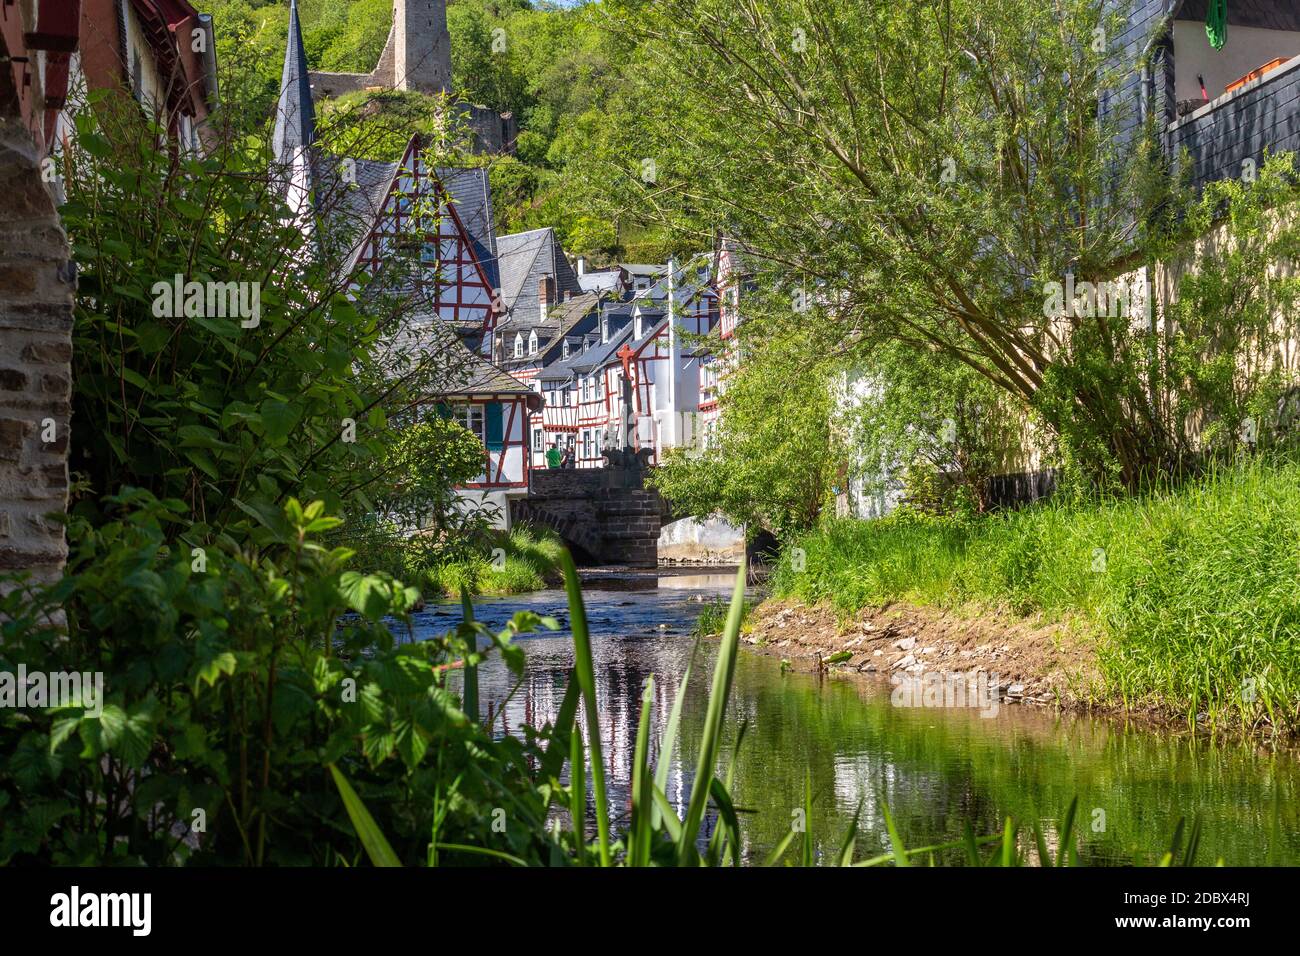 The village Monreal with river elz, half-timbered houses and castle Loewenburg in the background Stock Photo